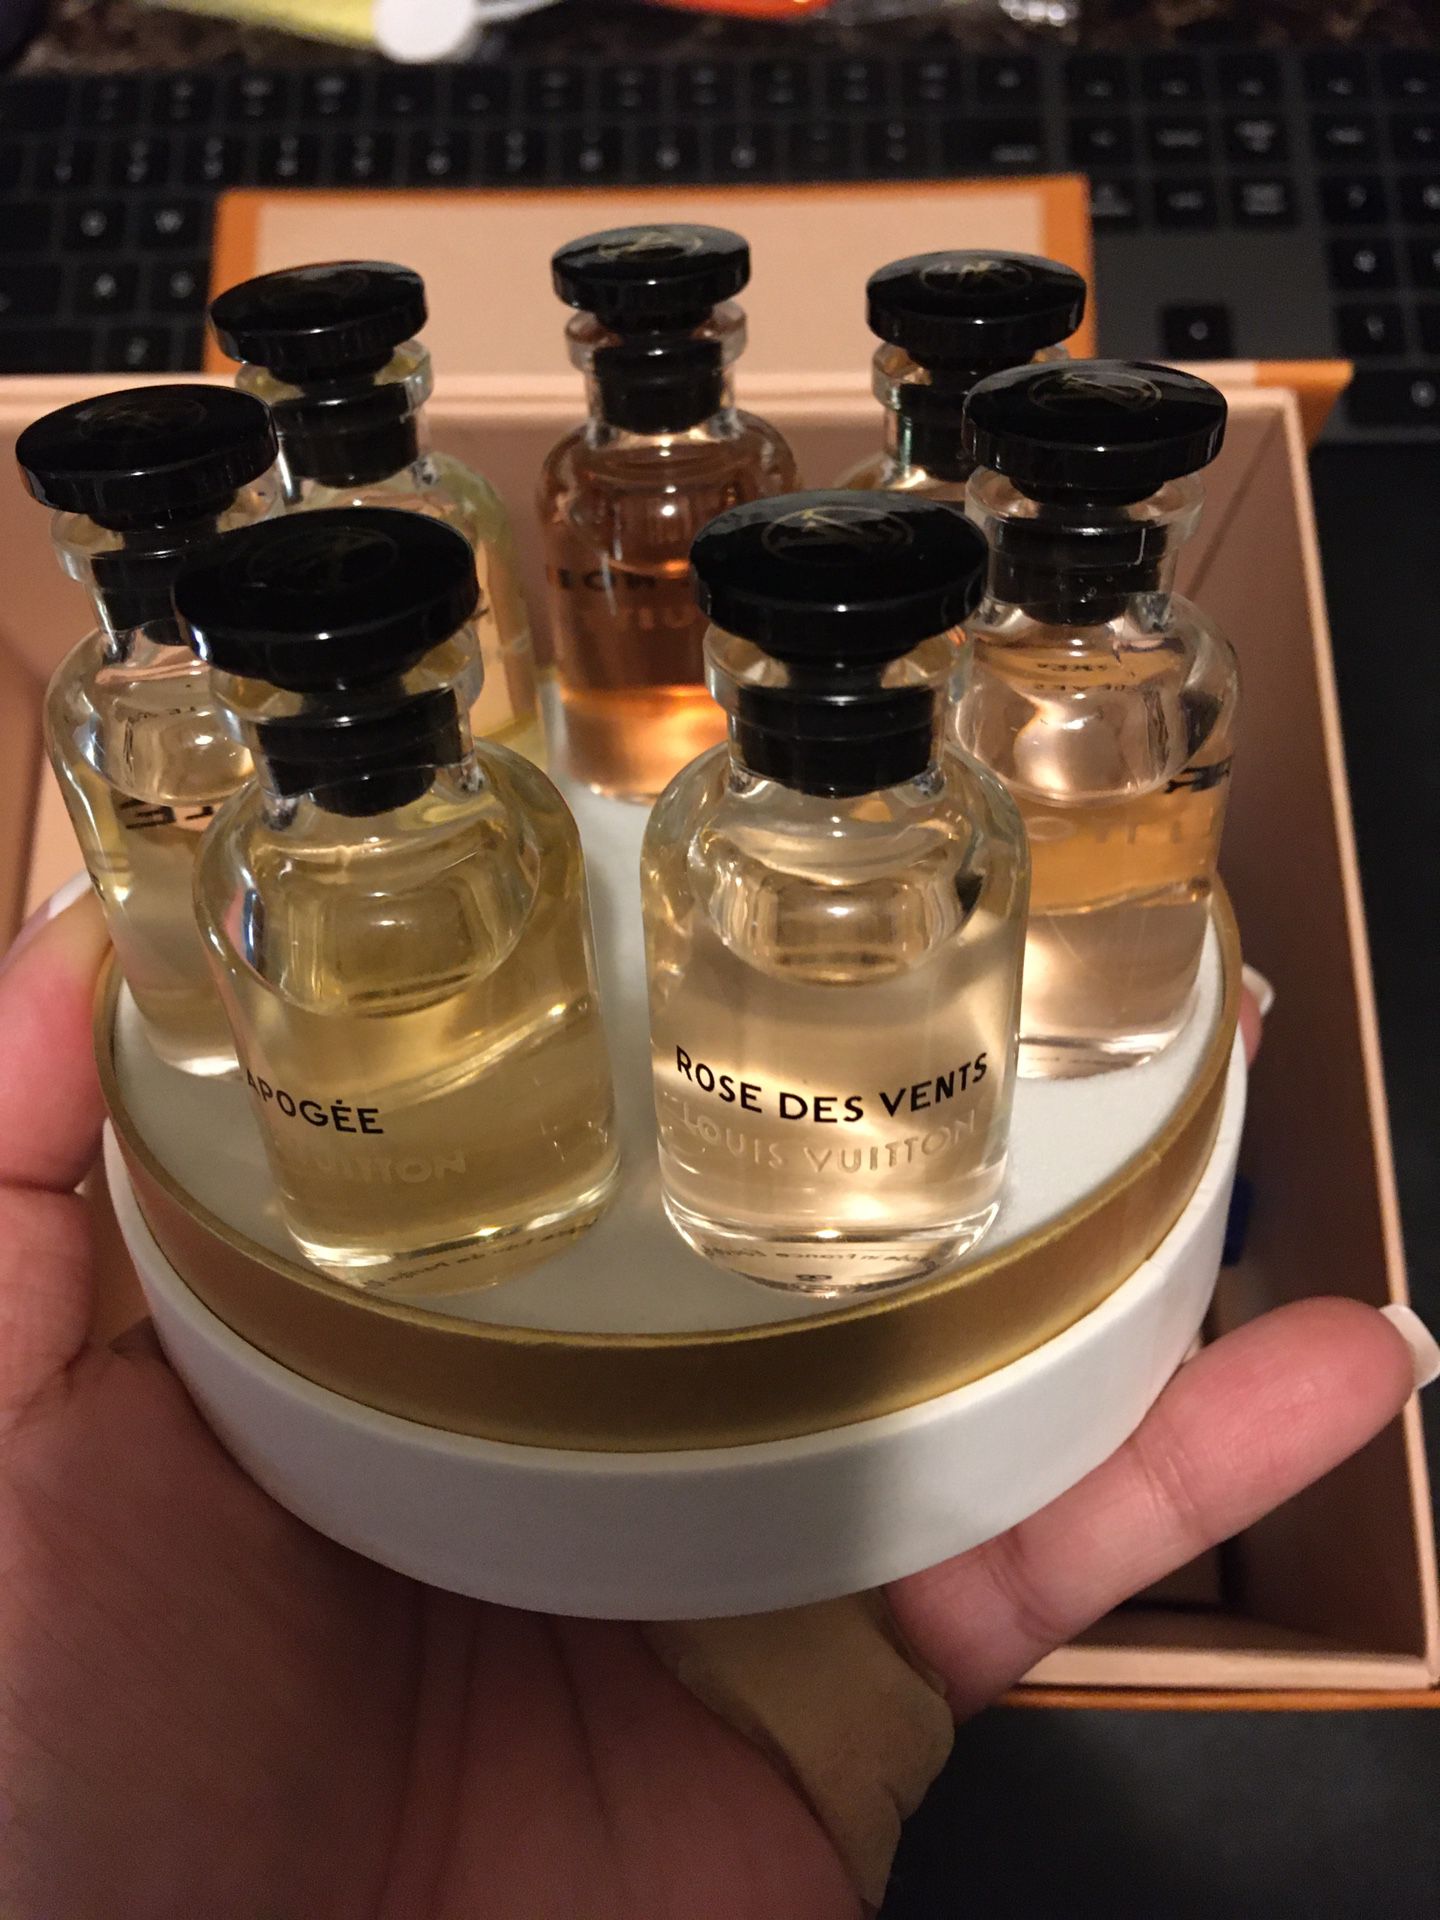 NEW ! LOUIS VUITTON PERFUME SAMPLES 3 BOXES for Sale in Lakeside, CA -  OfferUp